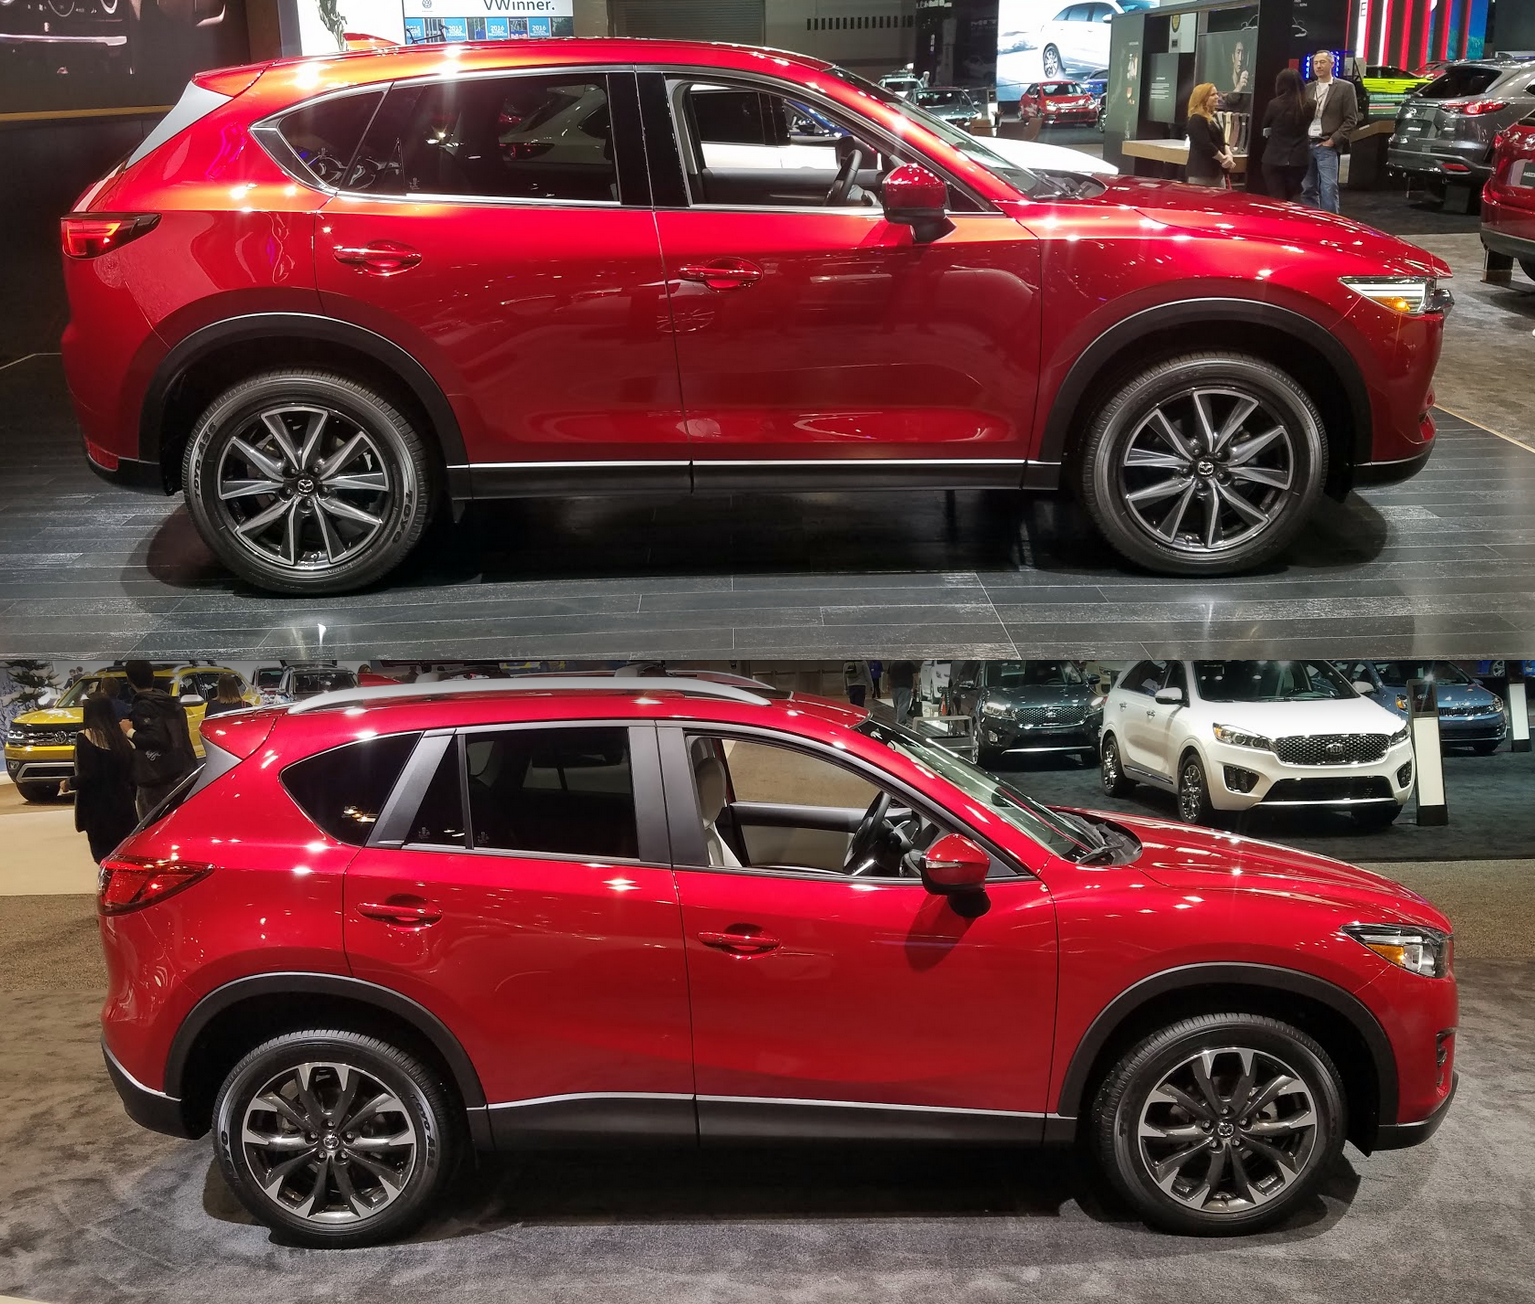 2016 vs. 2017 Mazda CX-5: What's the Difference? - Autotrader